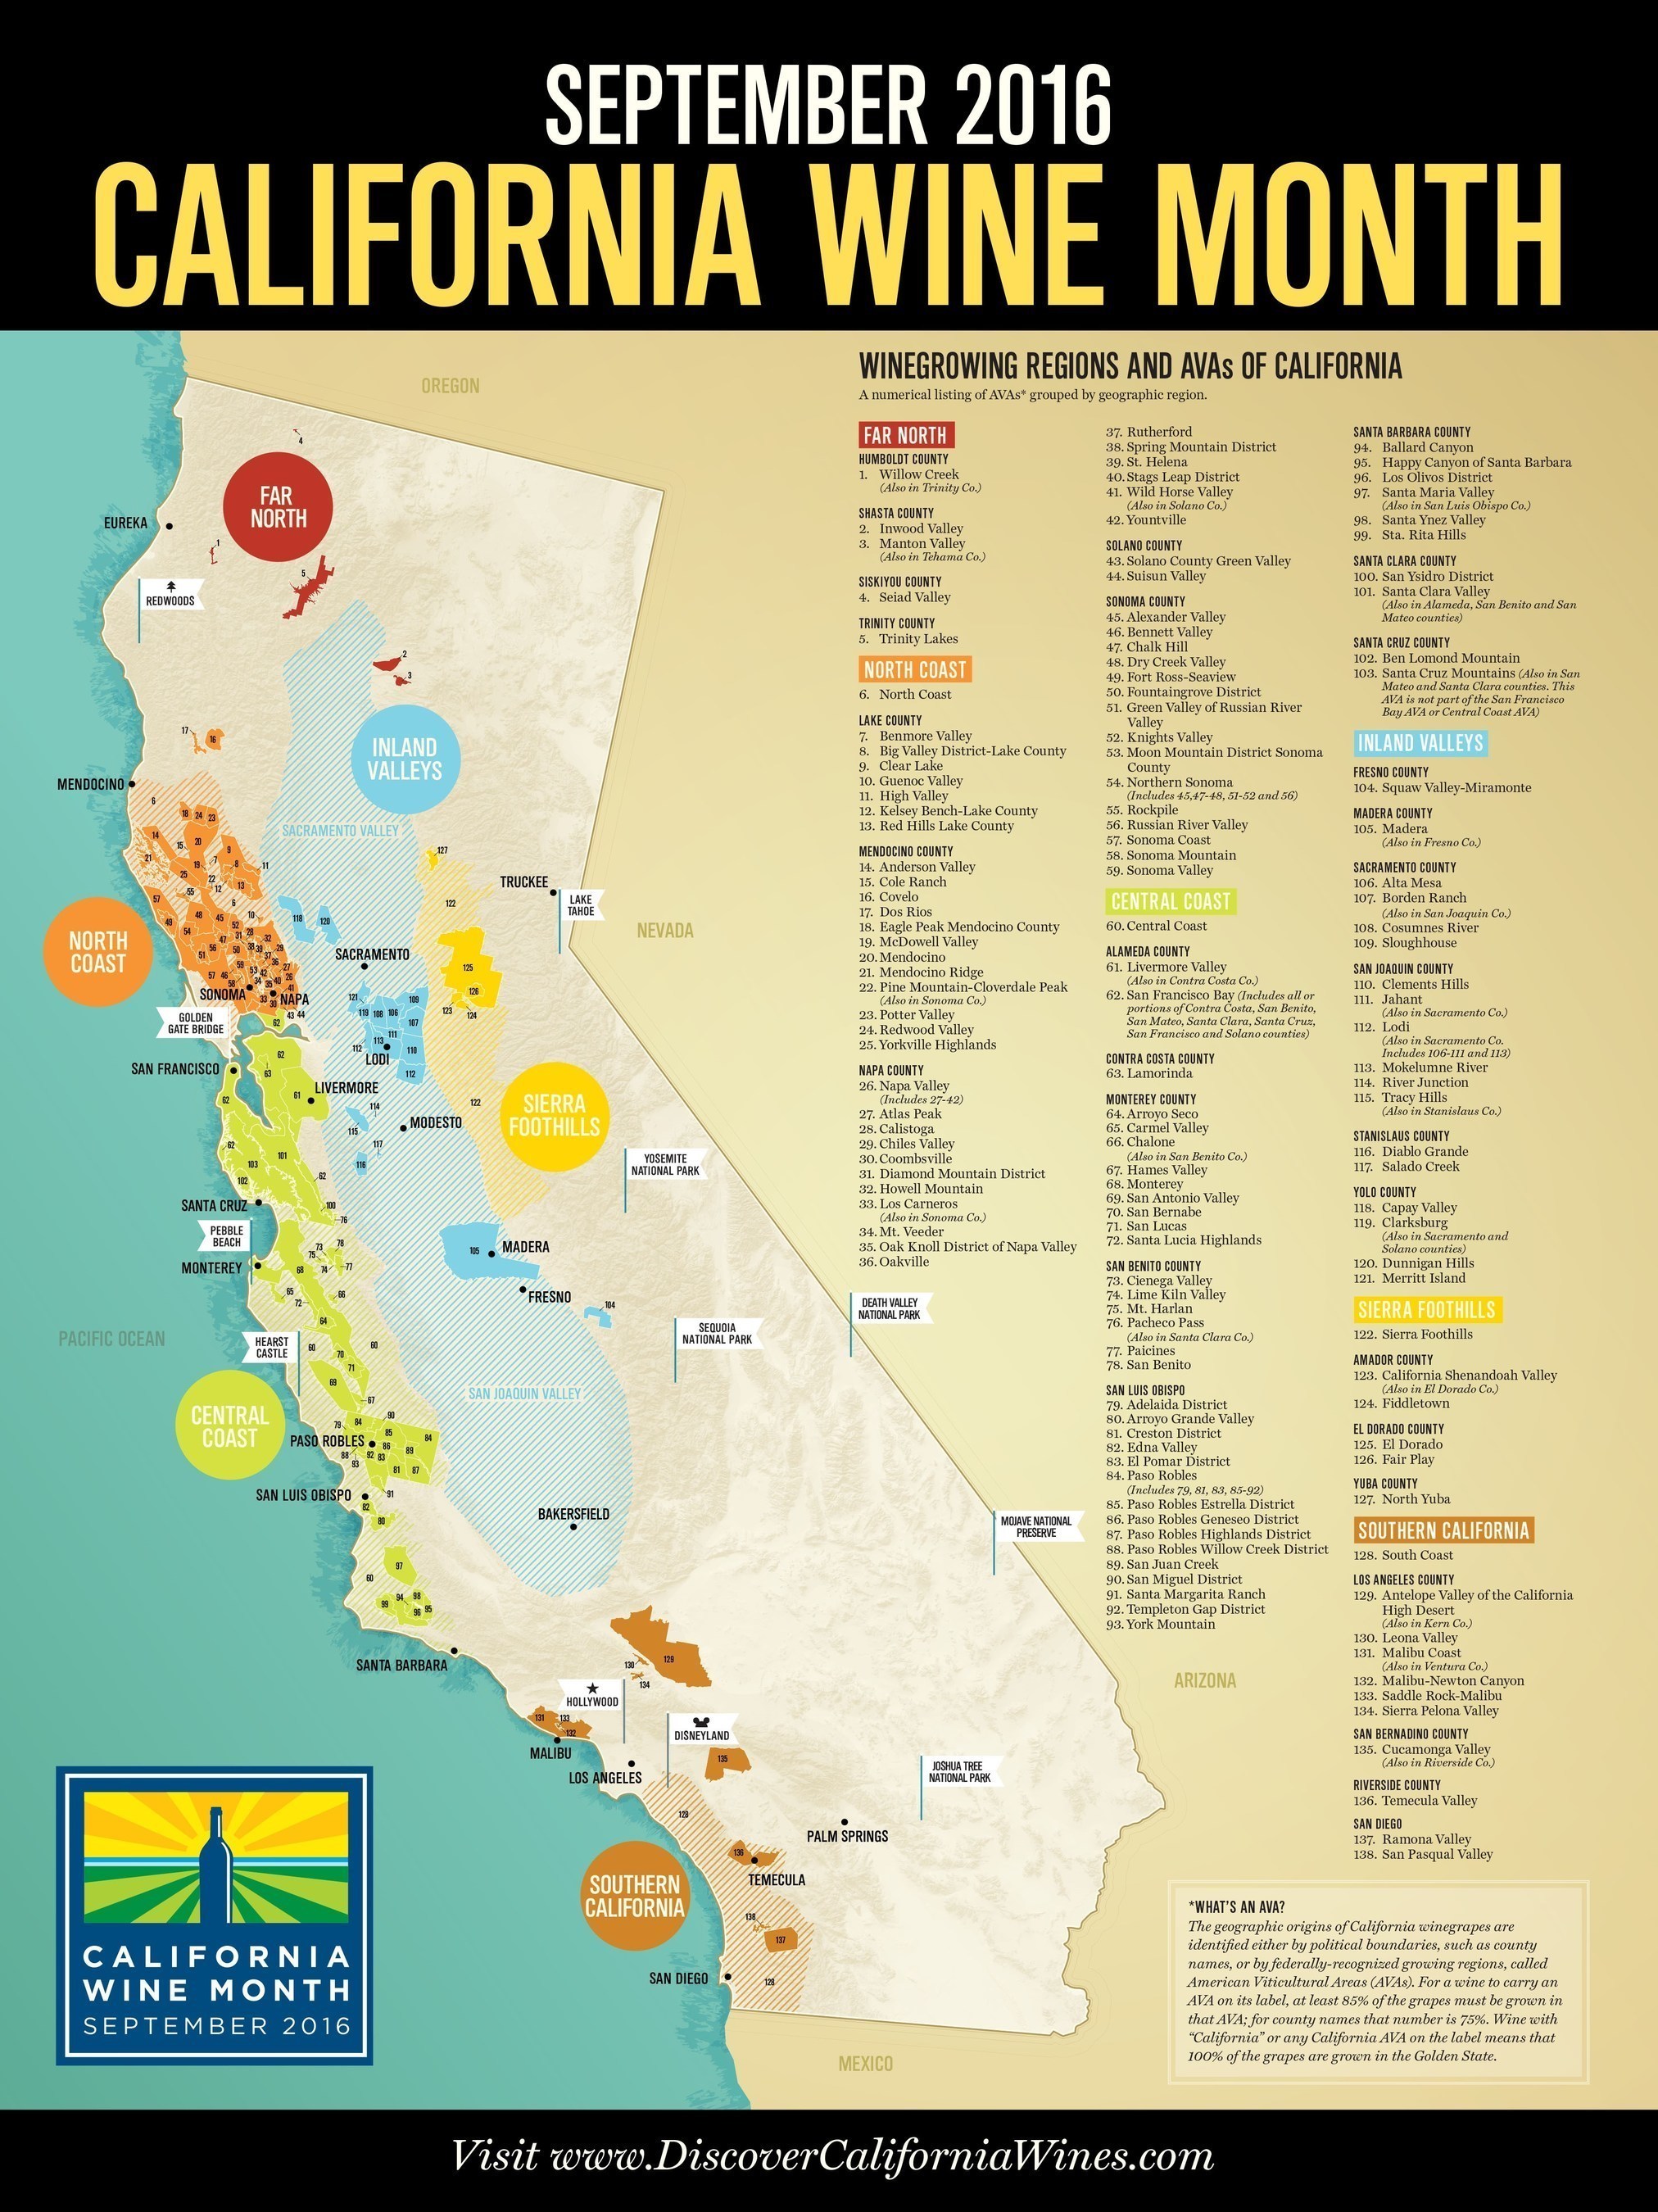 A California Wine Month poster featuring the state's wine regions and 138 American Viticultural Areas can be ordered at: www.discovercaliforniawines.com/californiawinemonth or by emailing communications@wineinstitute.org .